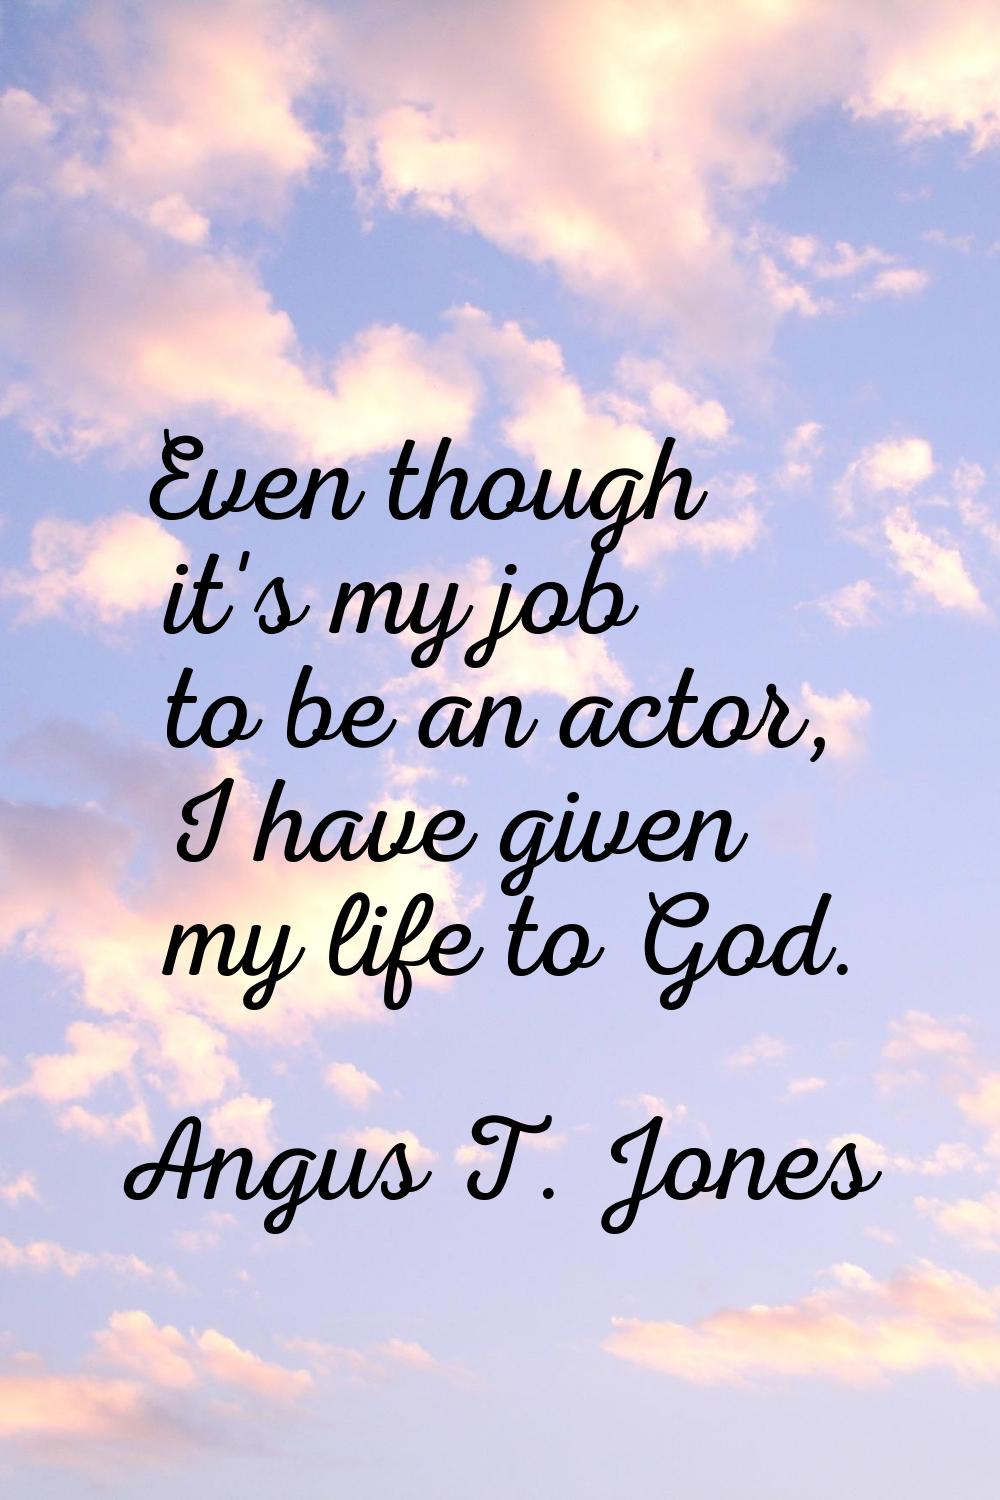 Even though it's my job to be an actor, I have given my life to God.